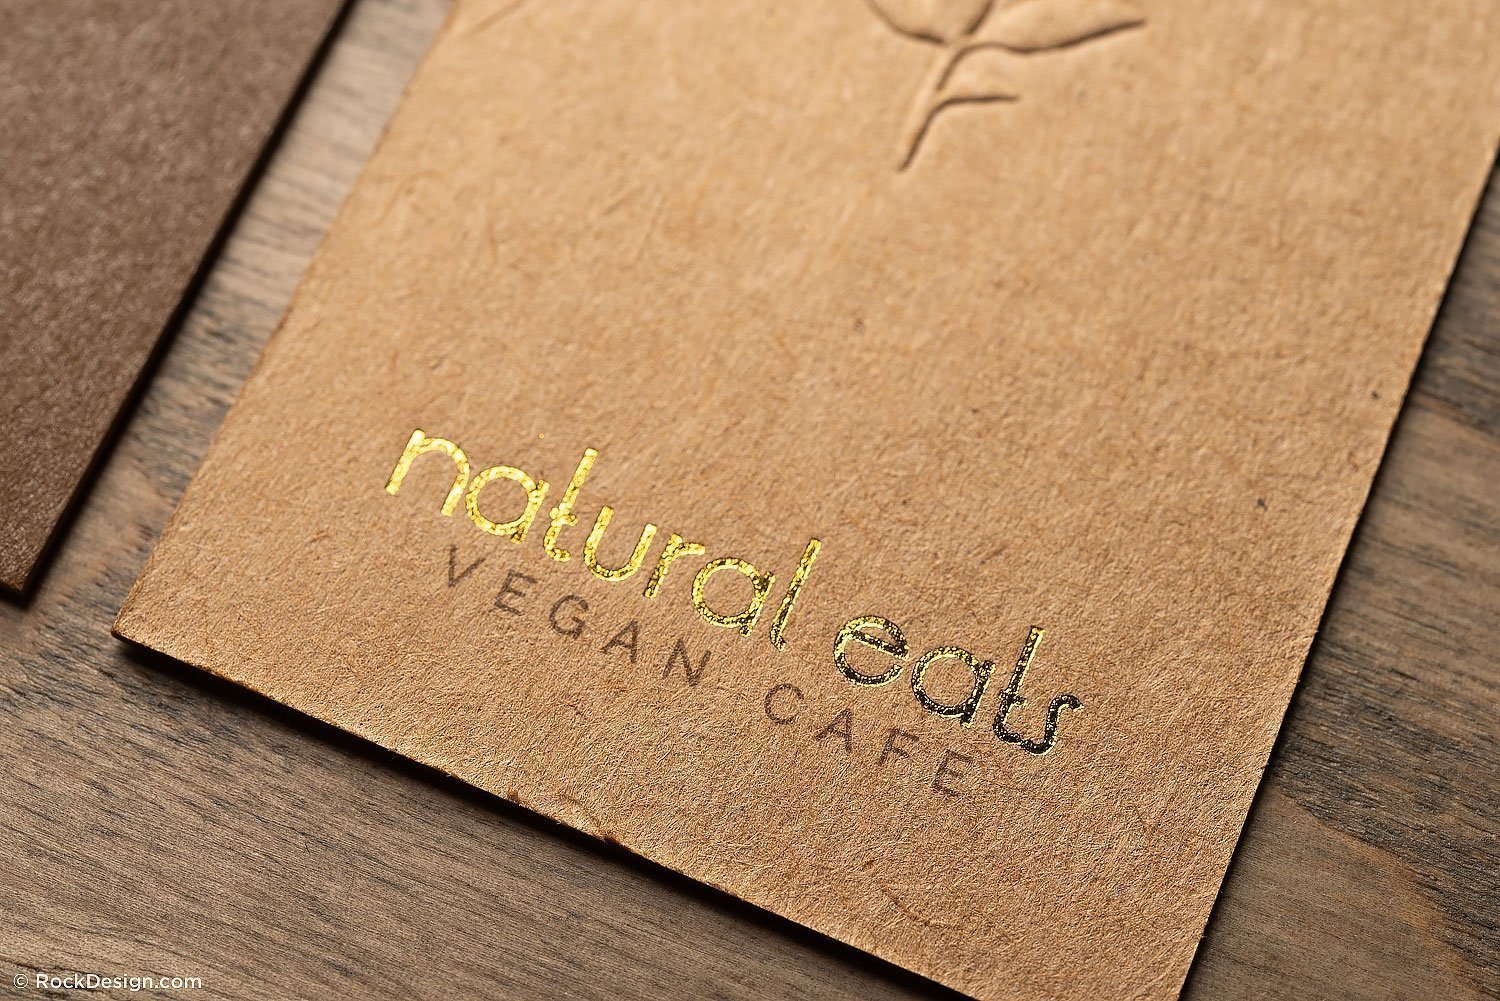 Kraft Paper Business Cards, Eco-friendly Cards